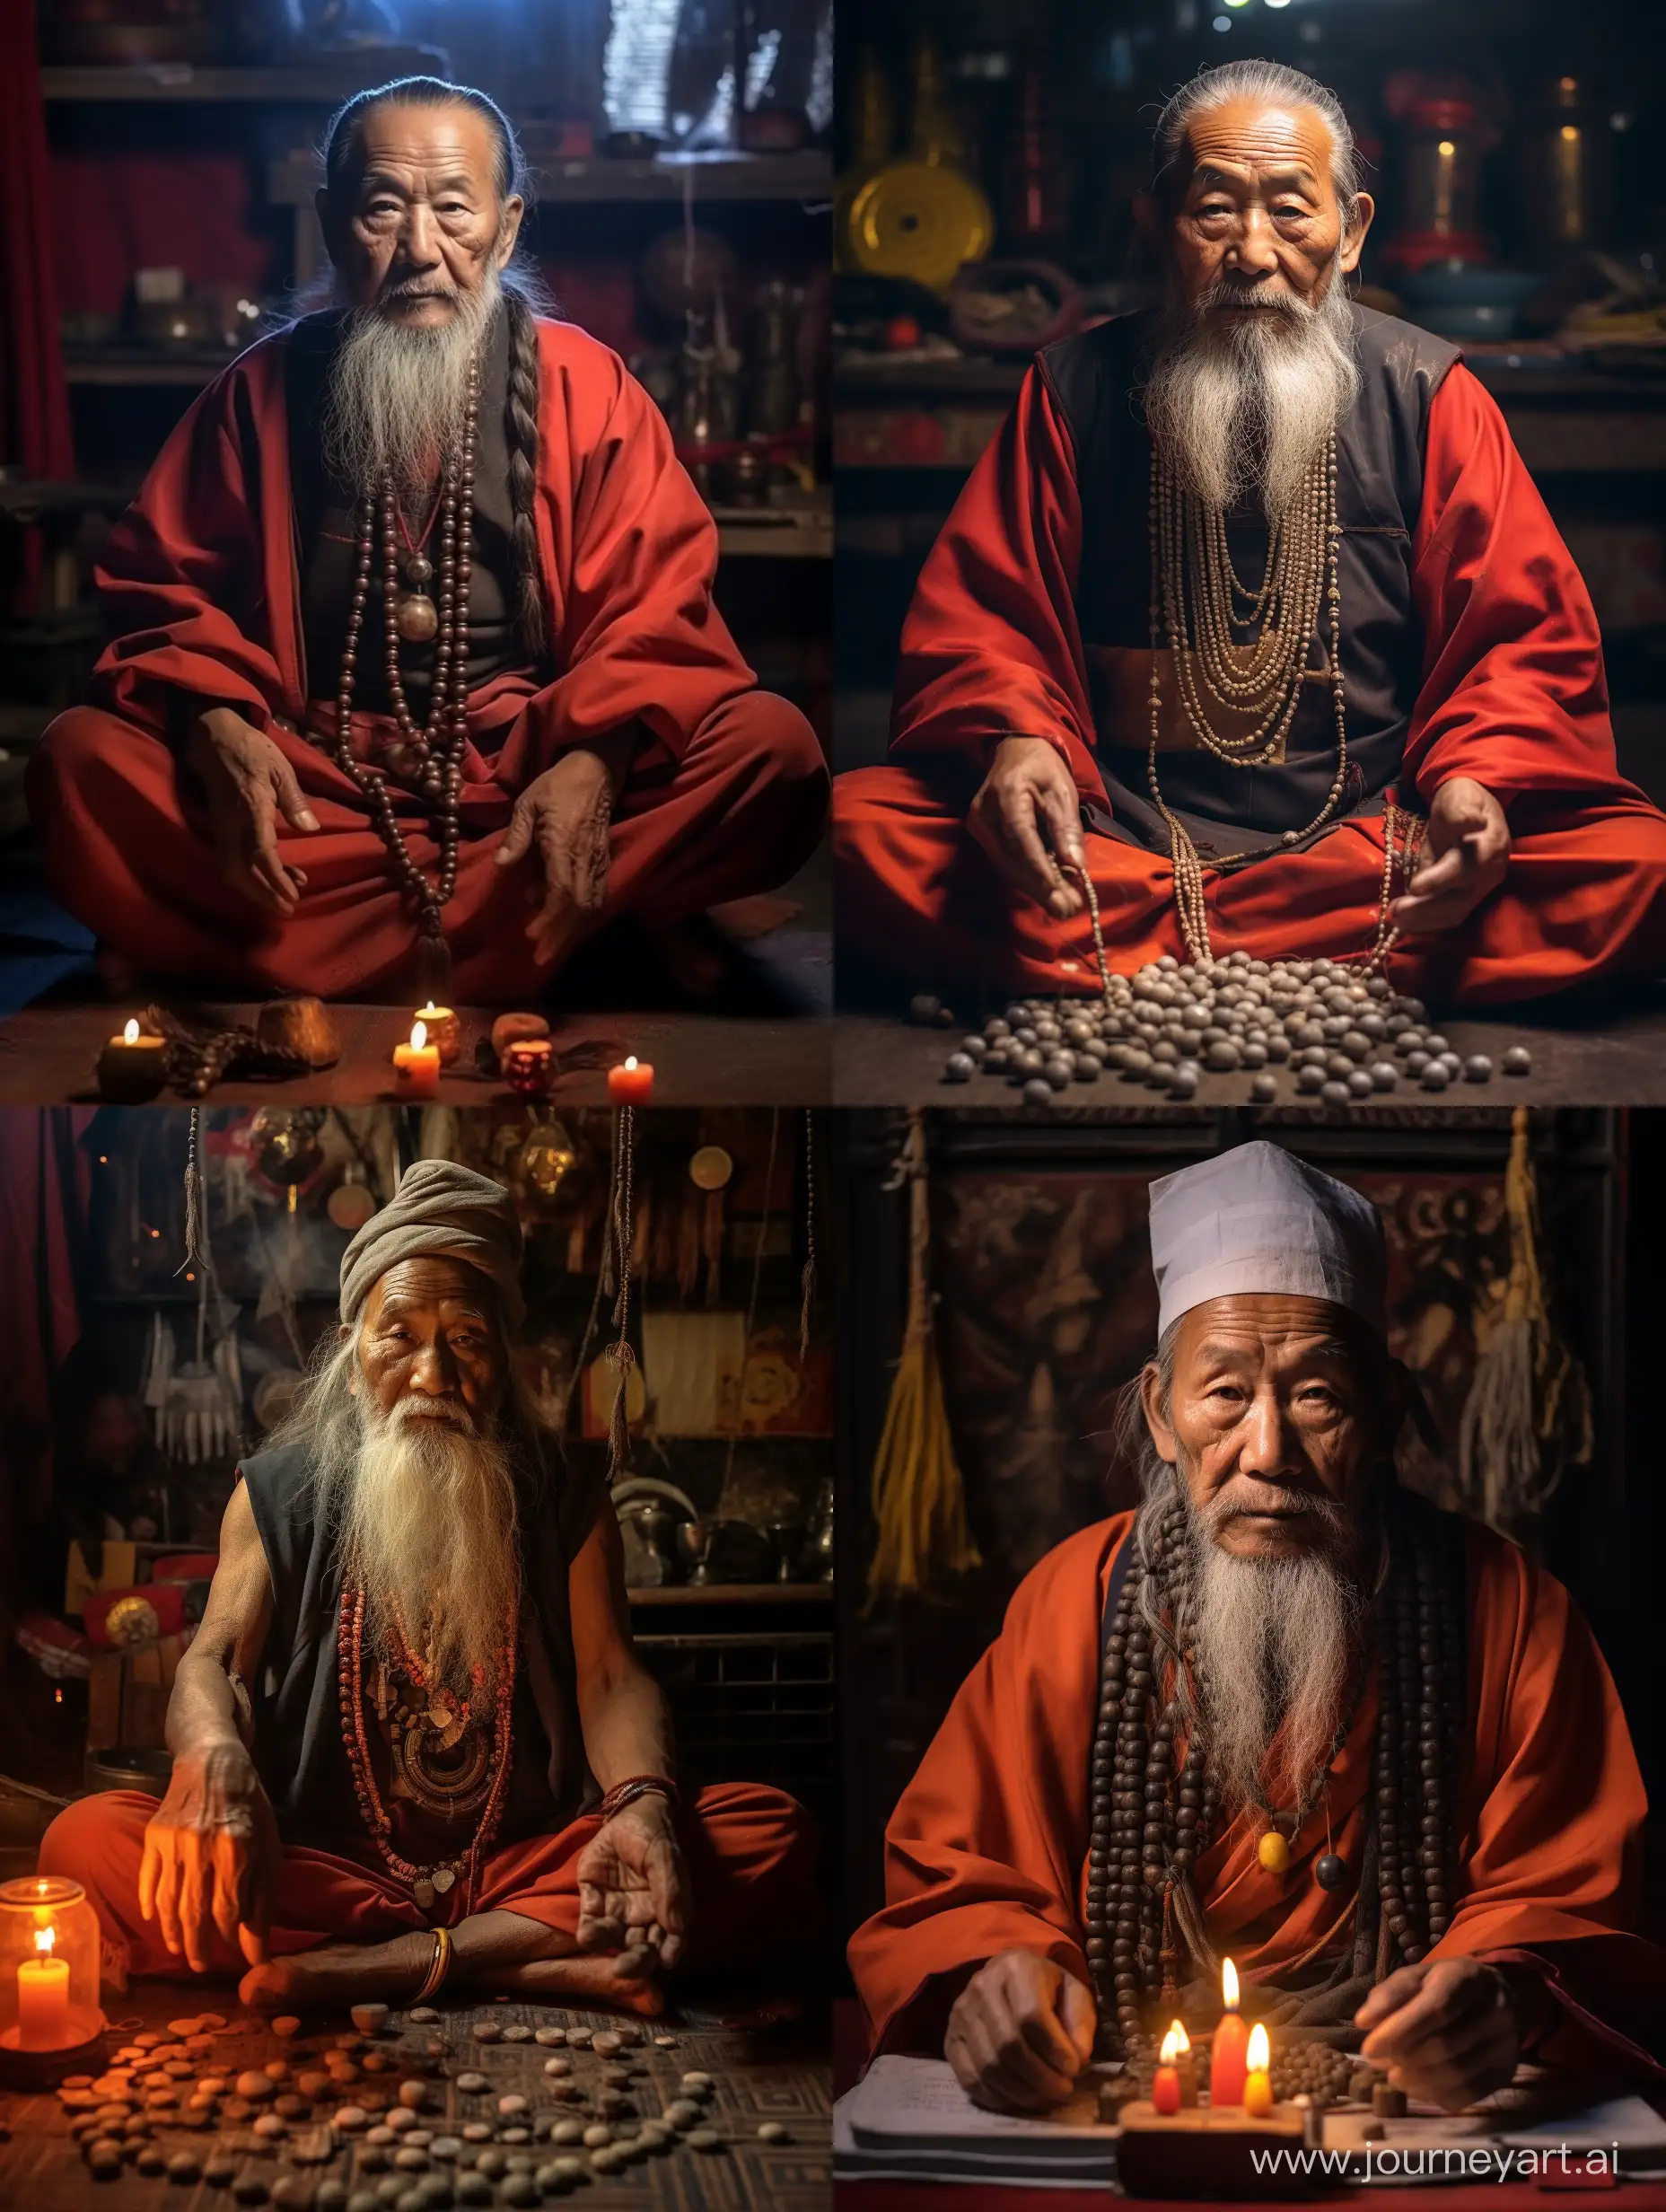 Chinese-Healer-Wise-Grandfather-Predicting-Future-with-Magical-Beads